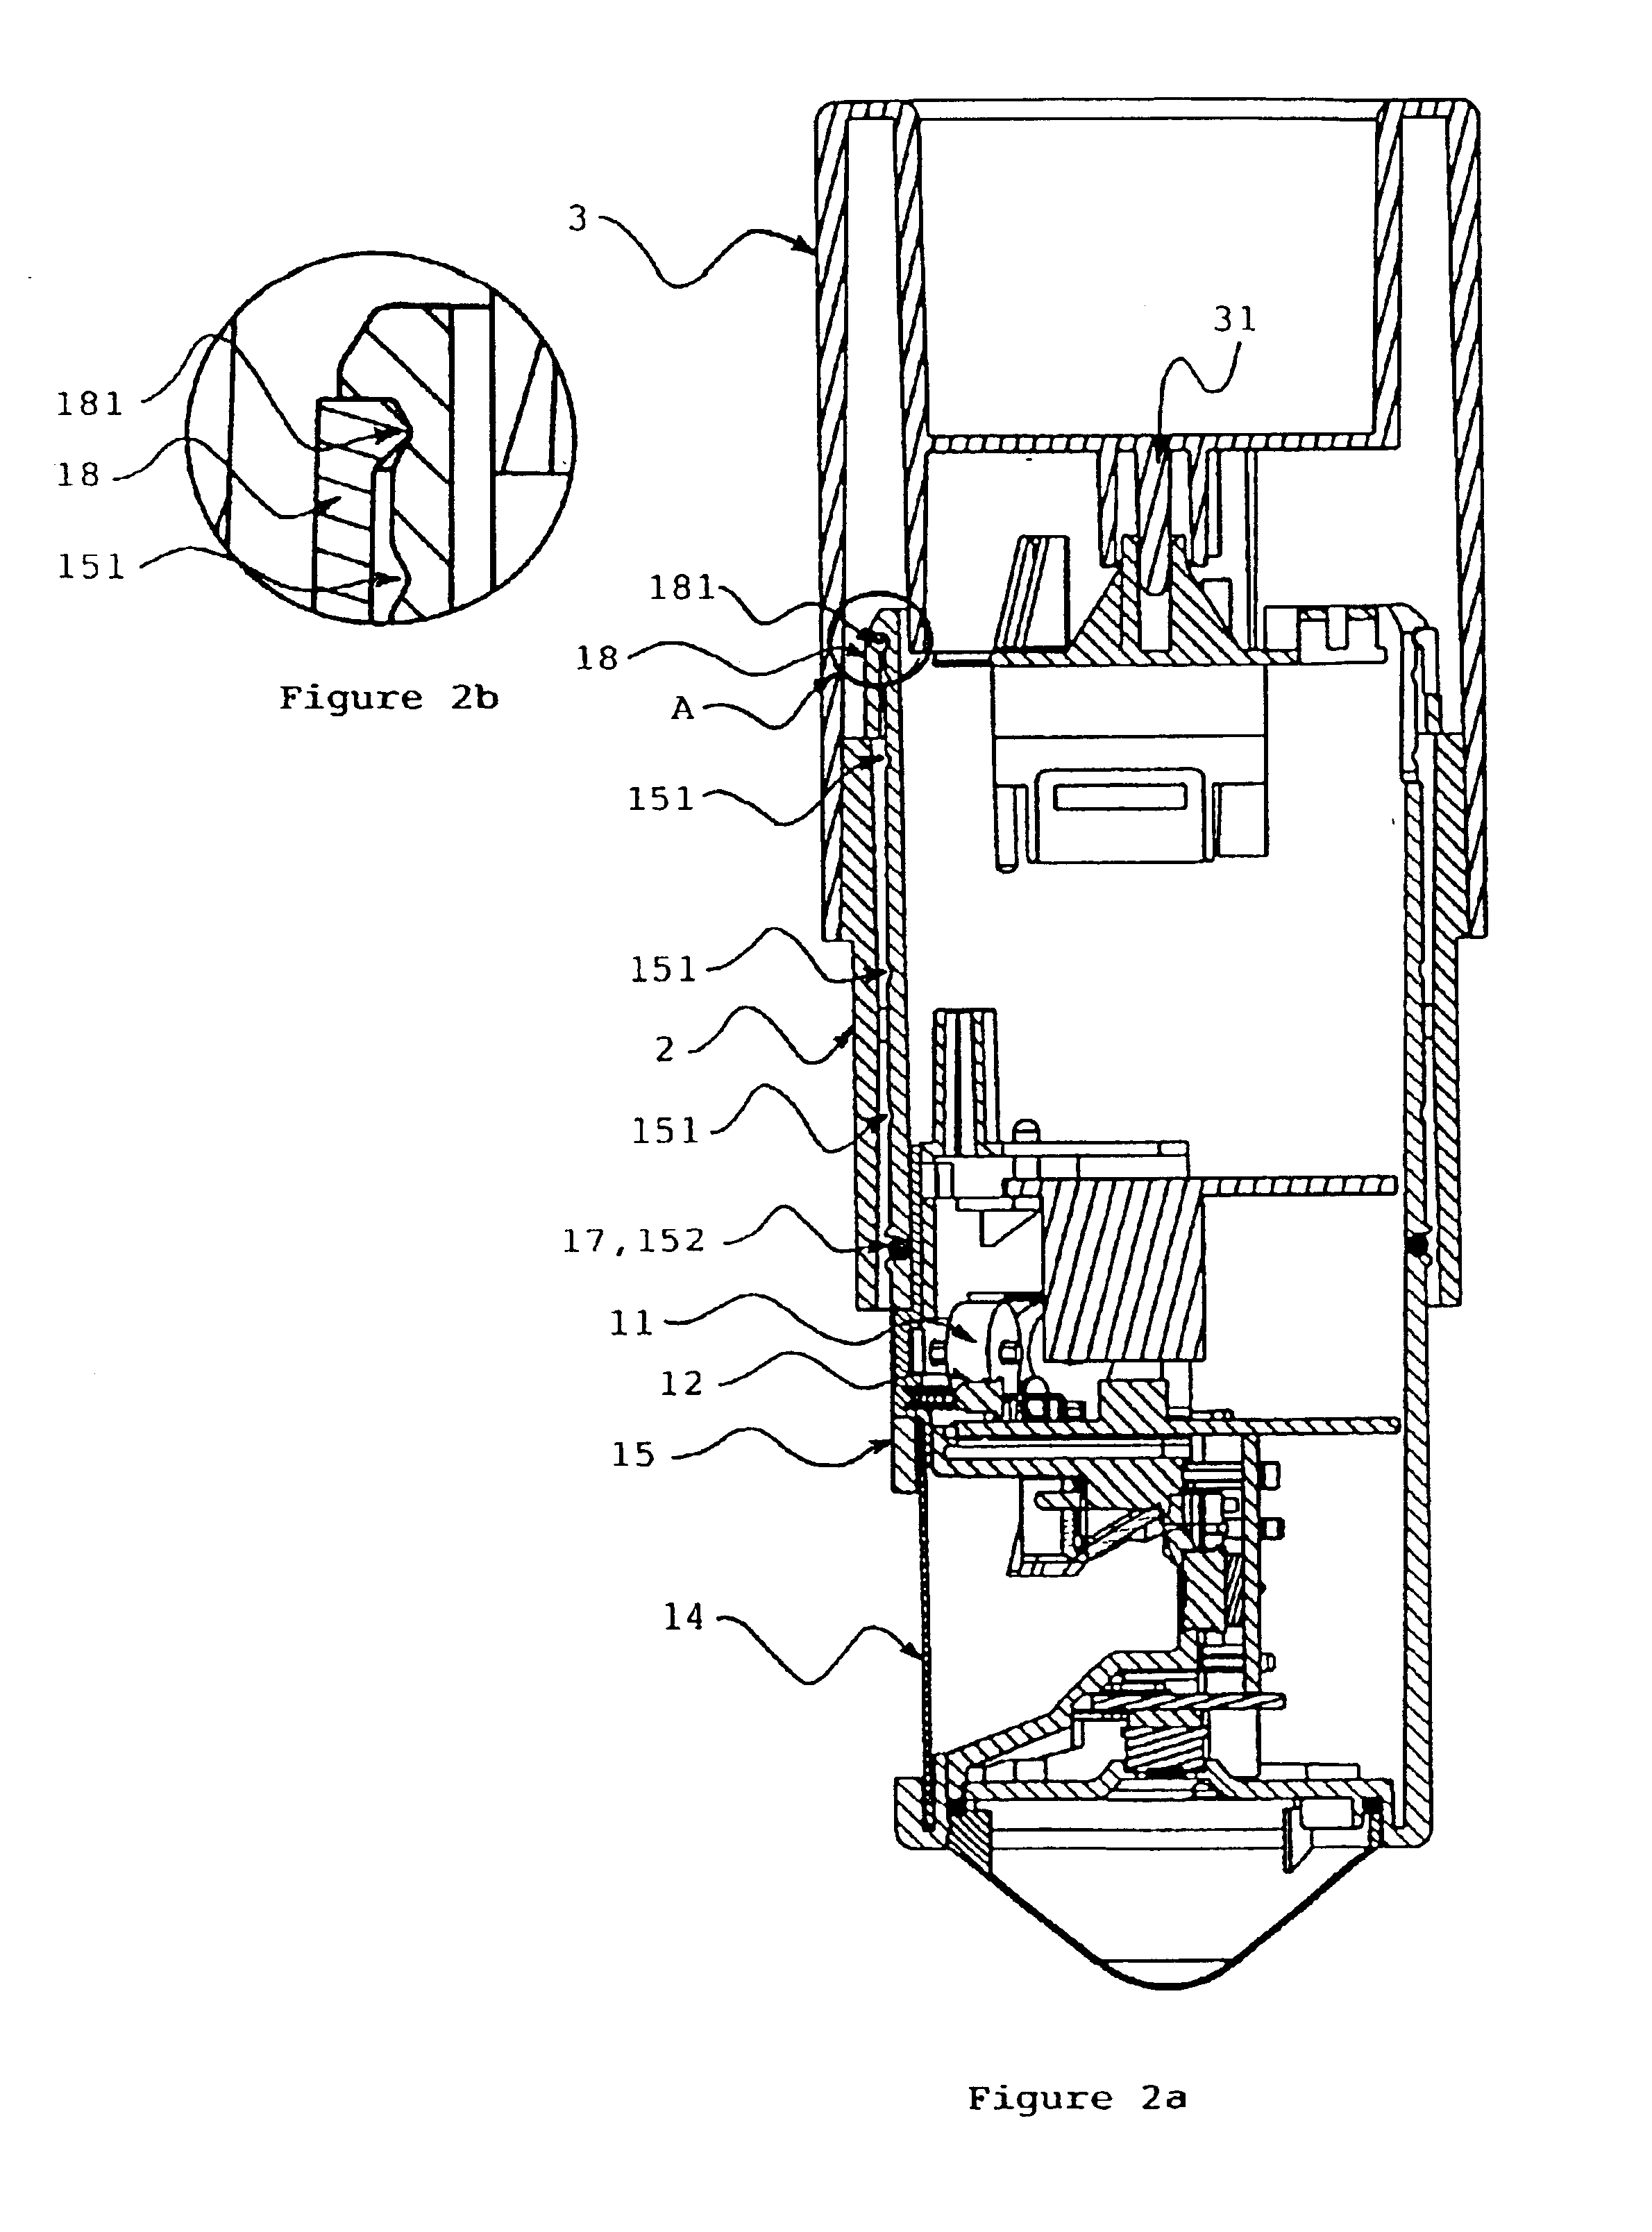 Covering and mounting structure for a motion detector having light emitting diodes and electronic adjustment controls